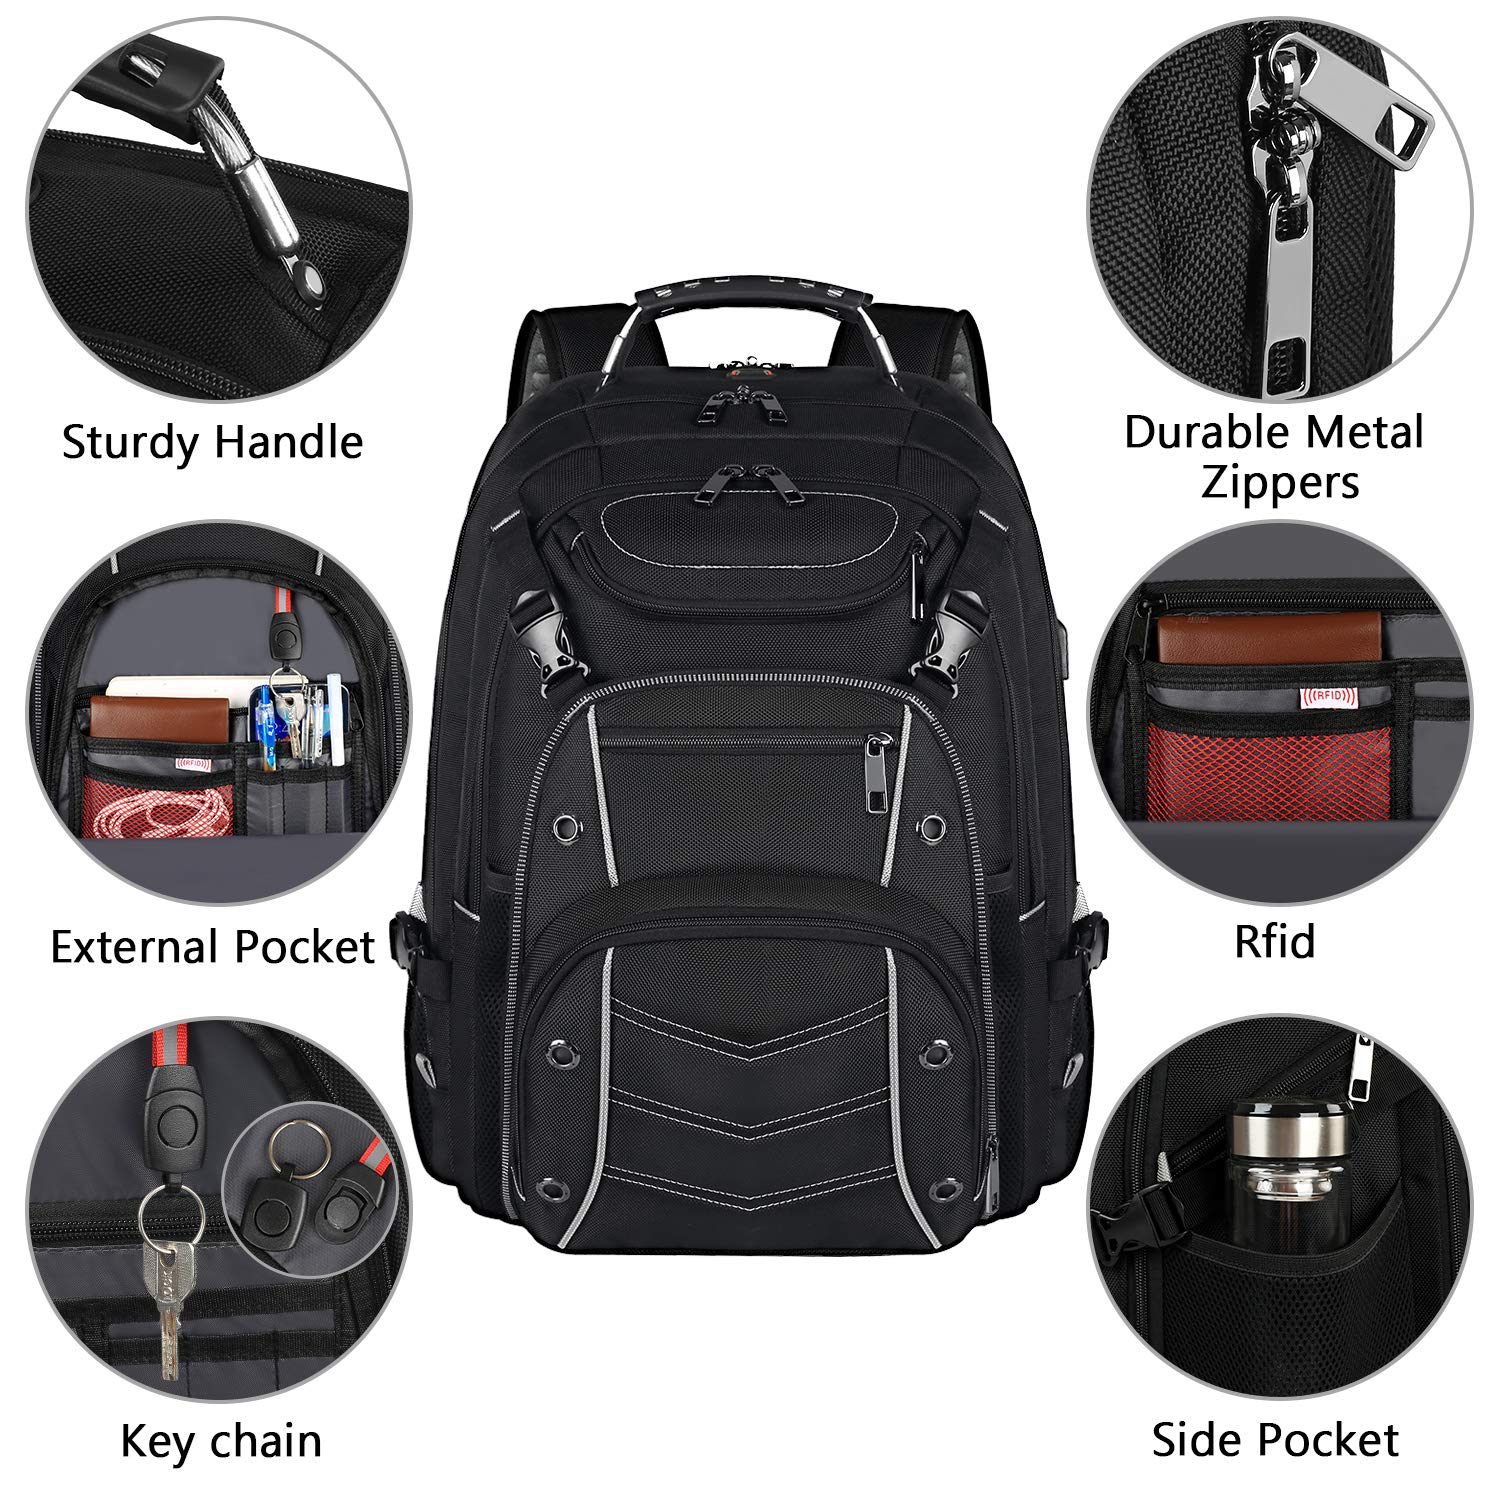 VECKUSON 18.4 Laptop Backpack for Men, 55L Extra Large Gaming Laptops Backpack with USB Charger Port,TSA Friendly Flight Approved and RFID Anti-Theft Pocket, adult business xl backpack